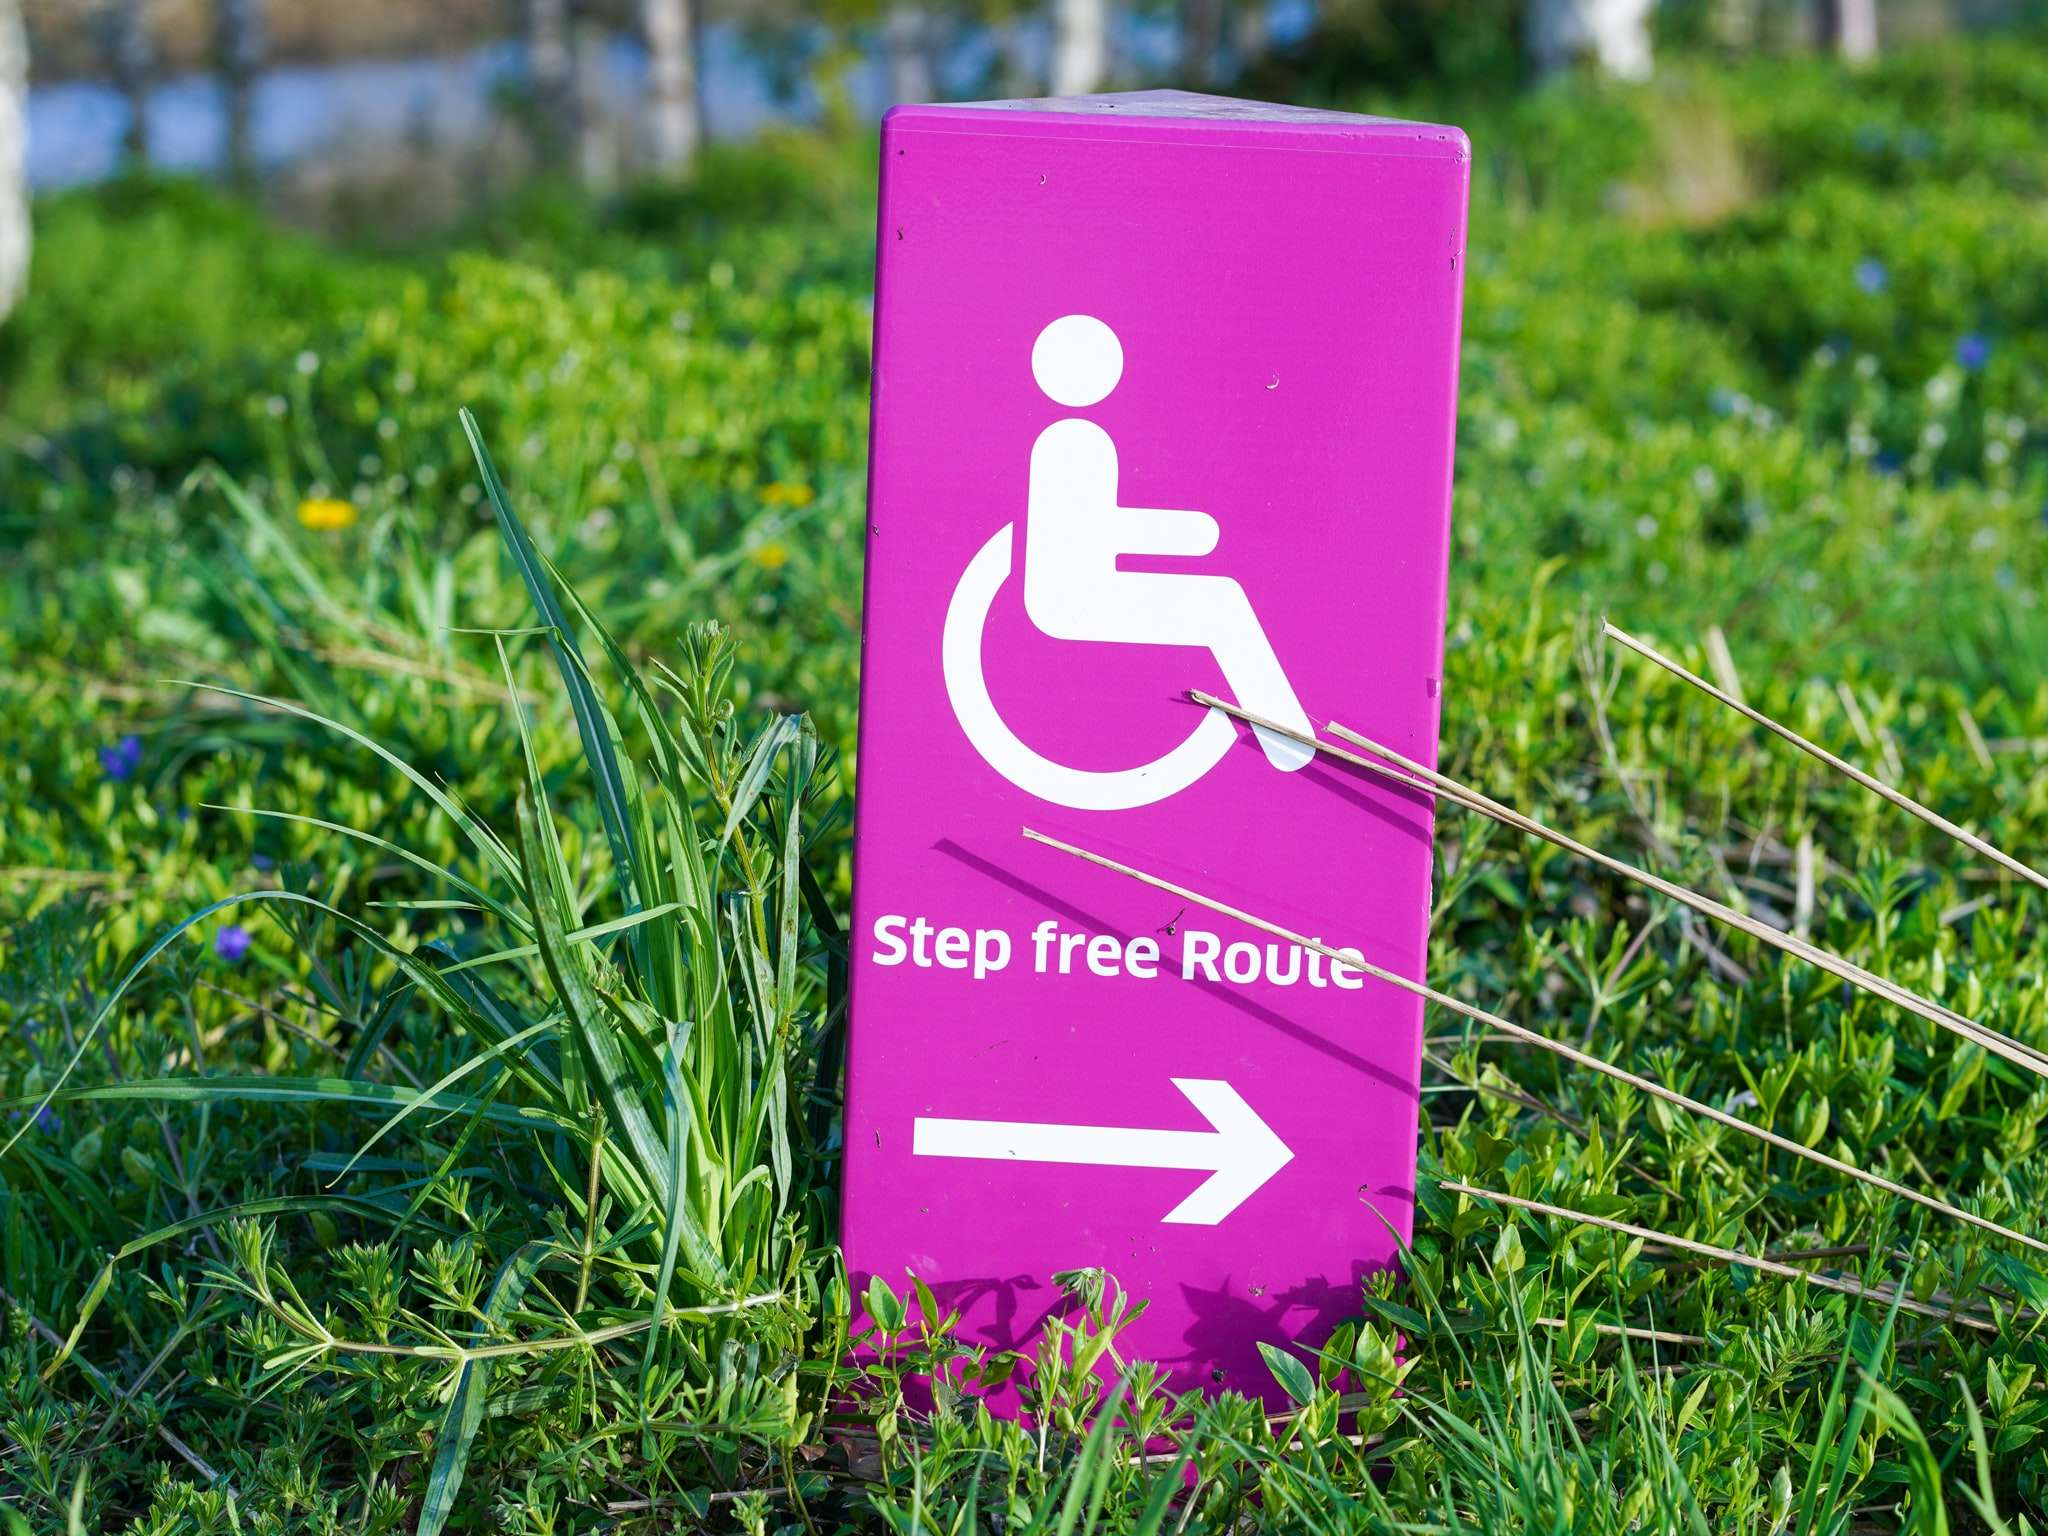 California Cities Sue Law Firm Accused of Abusing the ADA To Target Small Minority Businesses